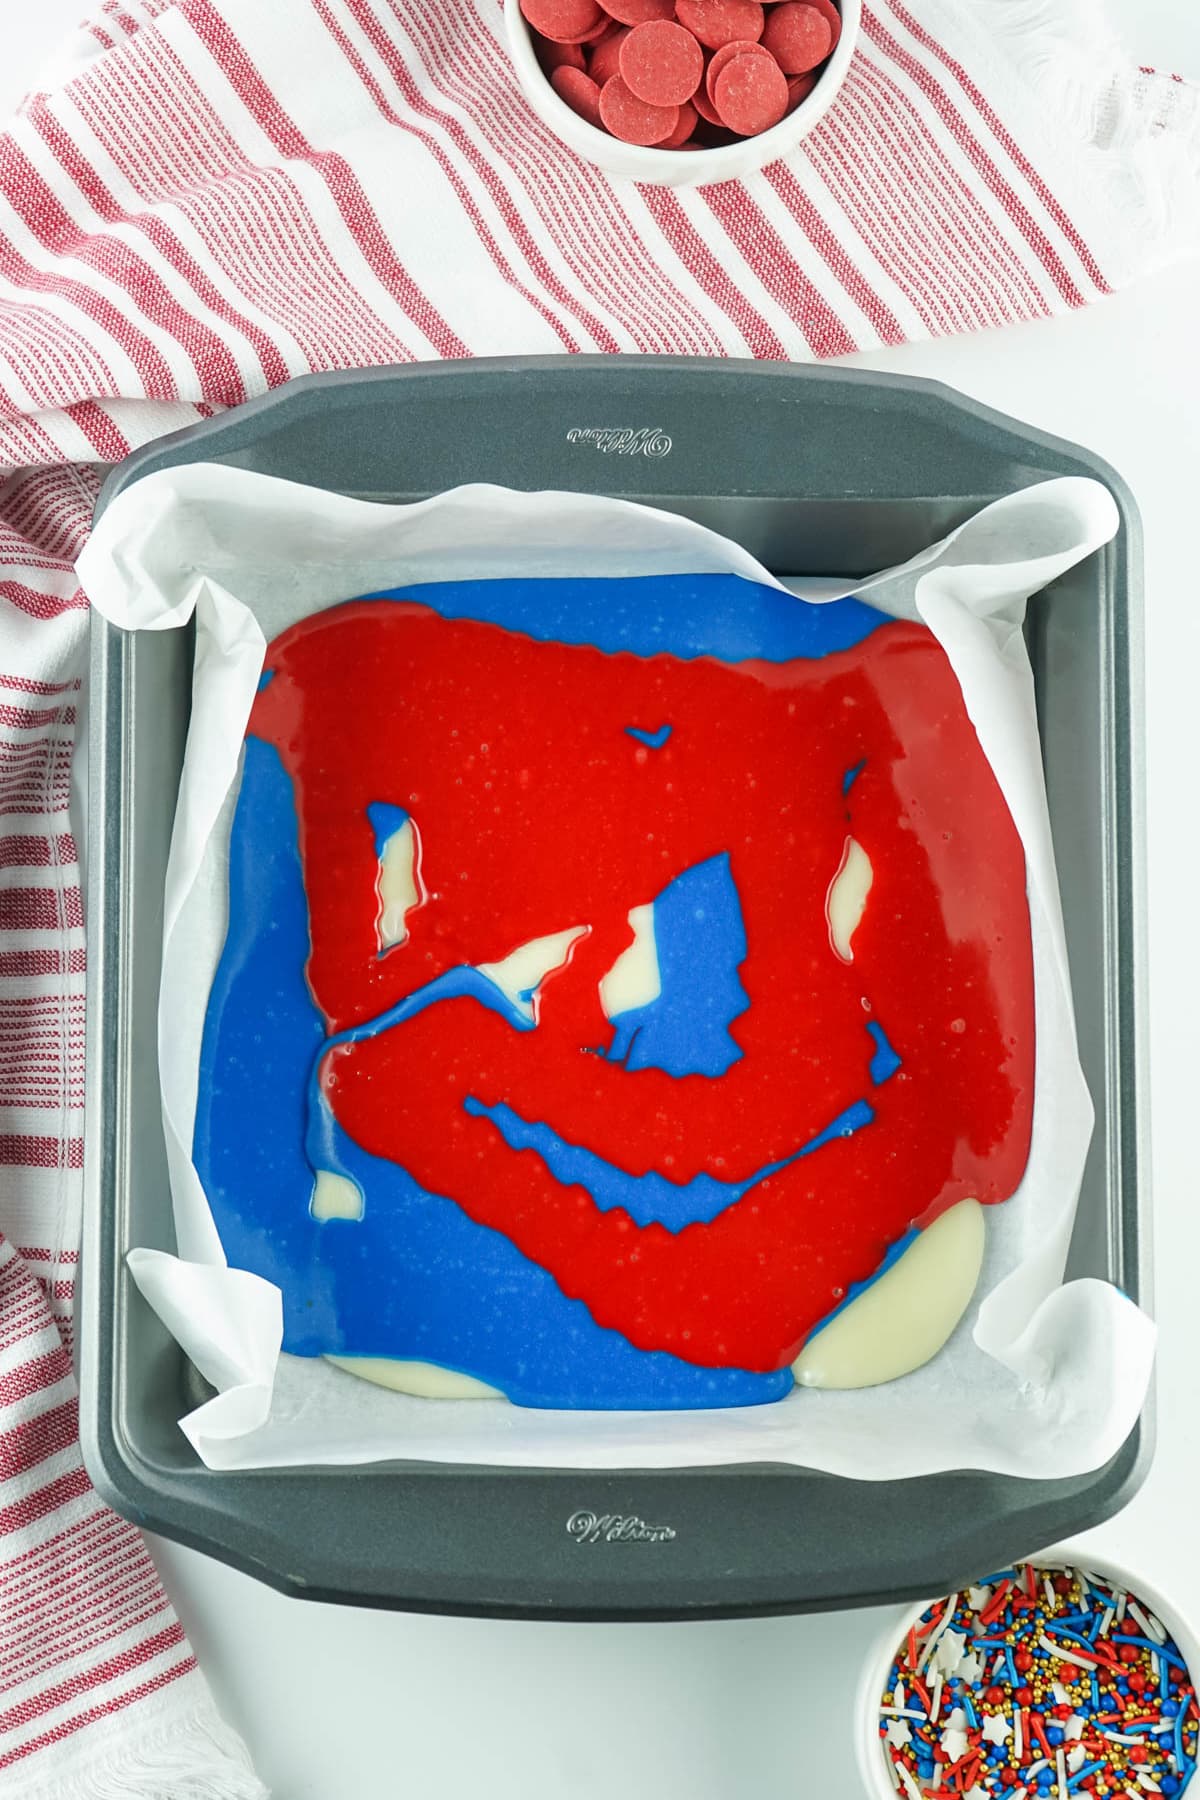 Red, white and blue chocolate in square pan